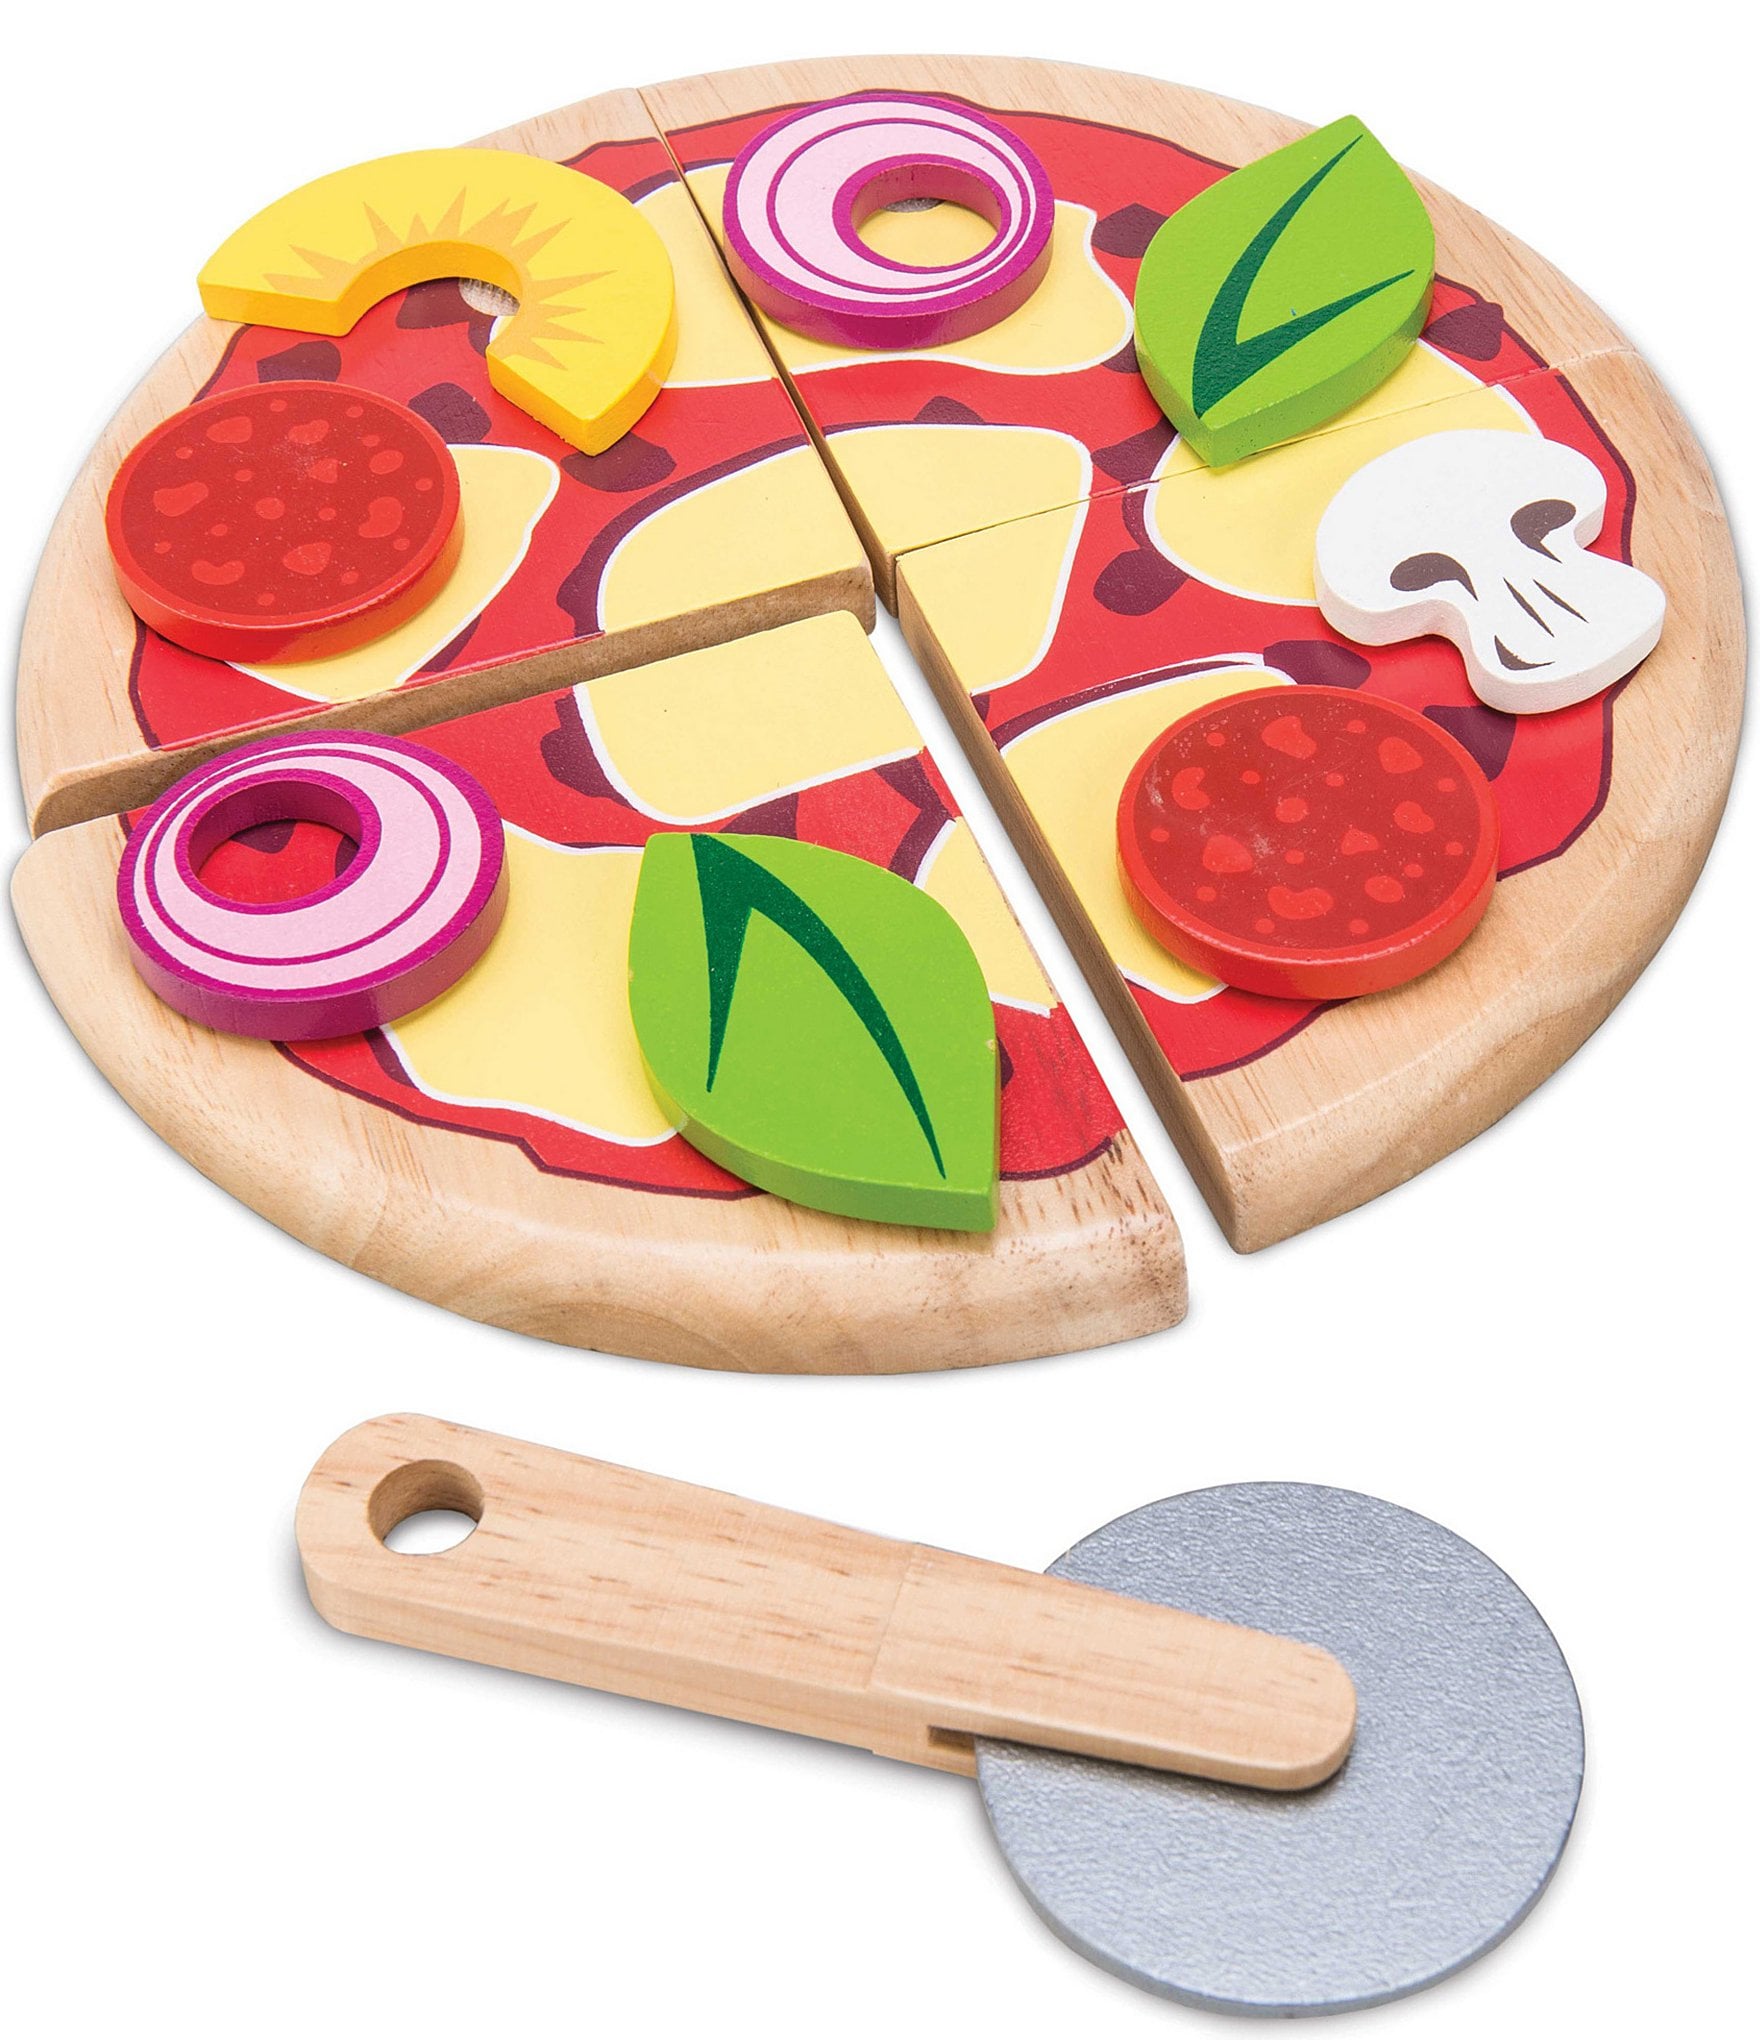 Wooden Pizza Toy